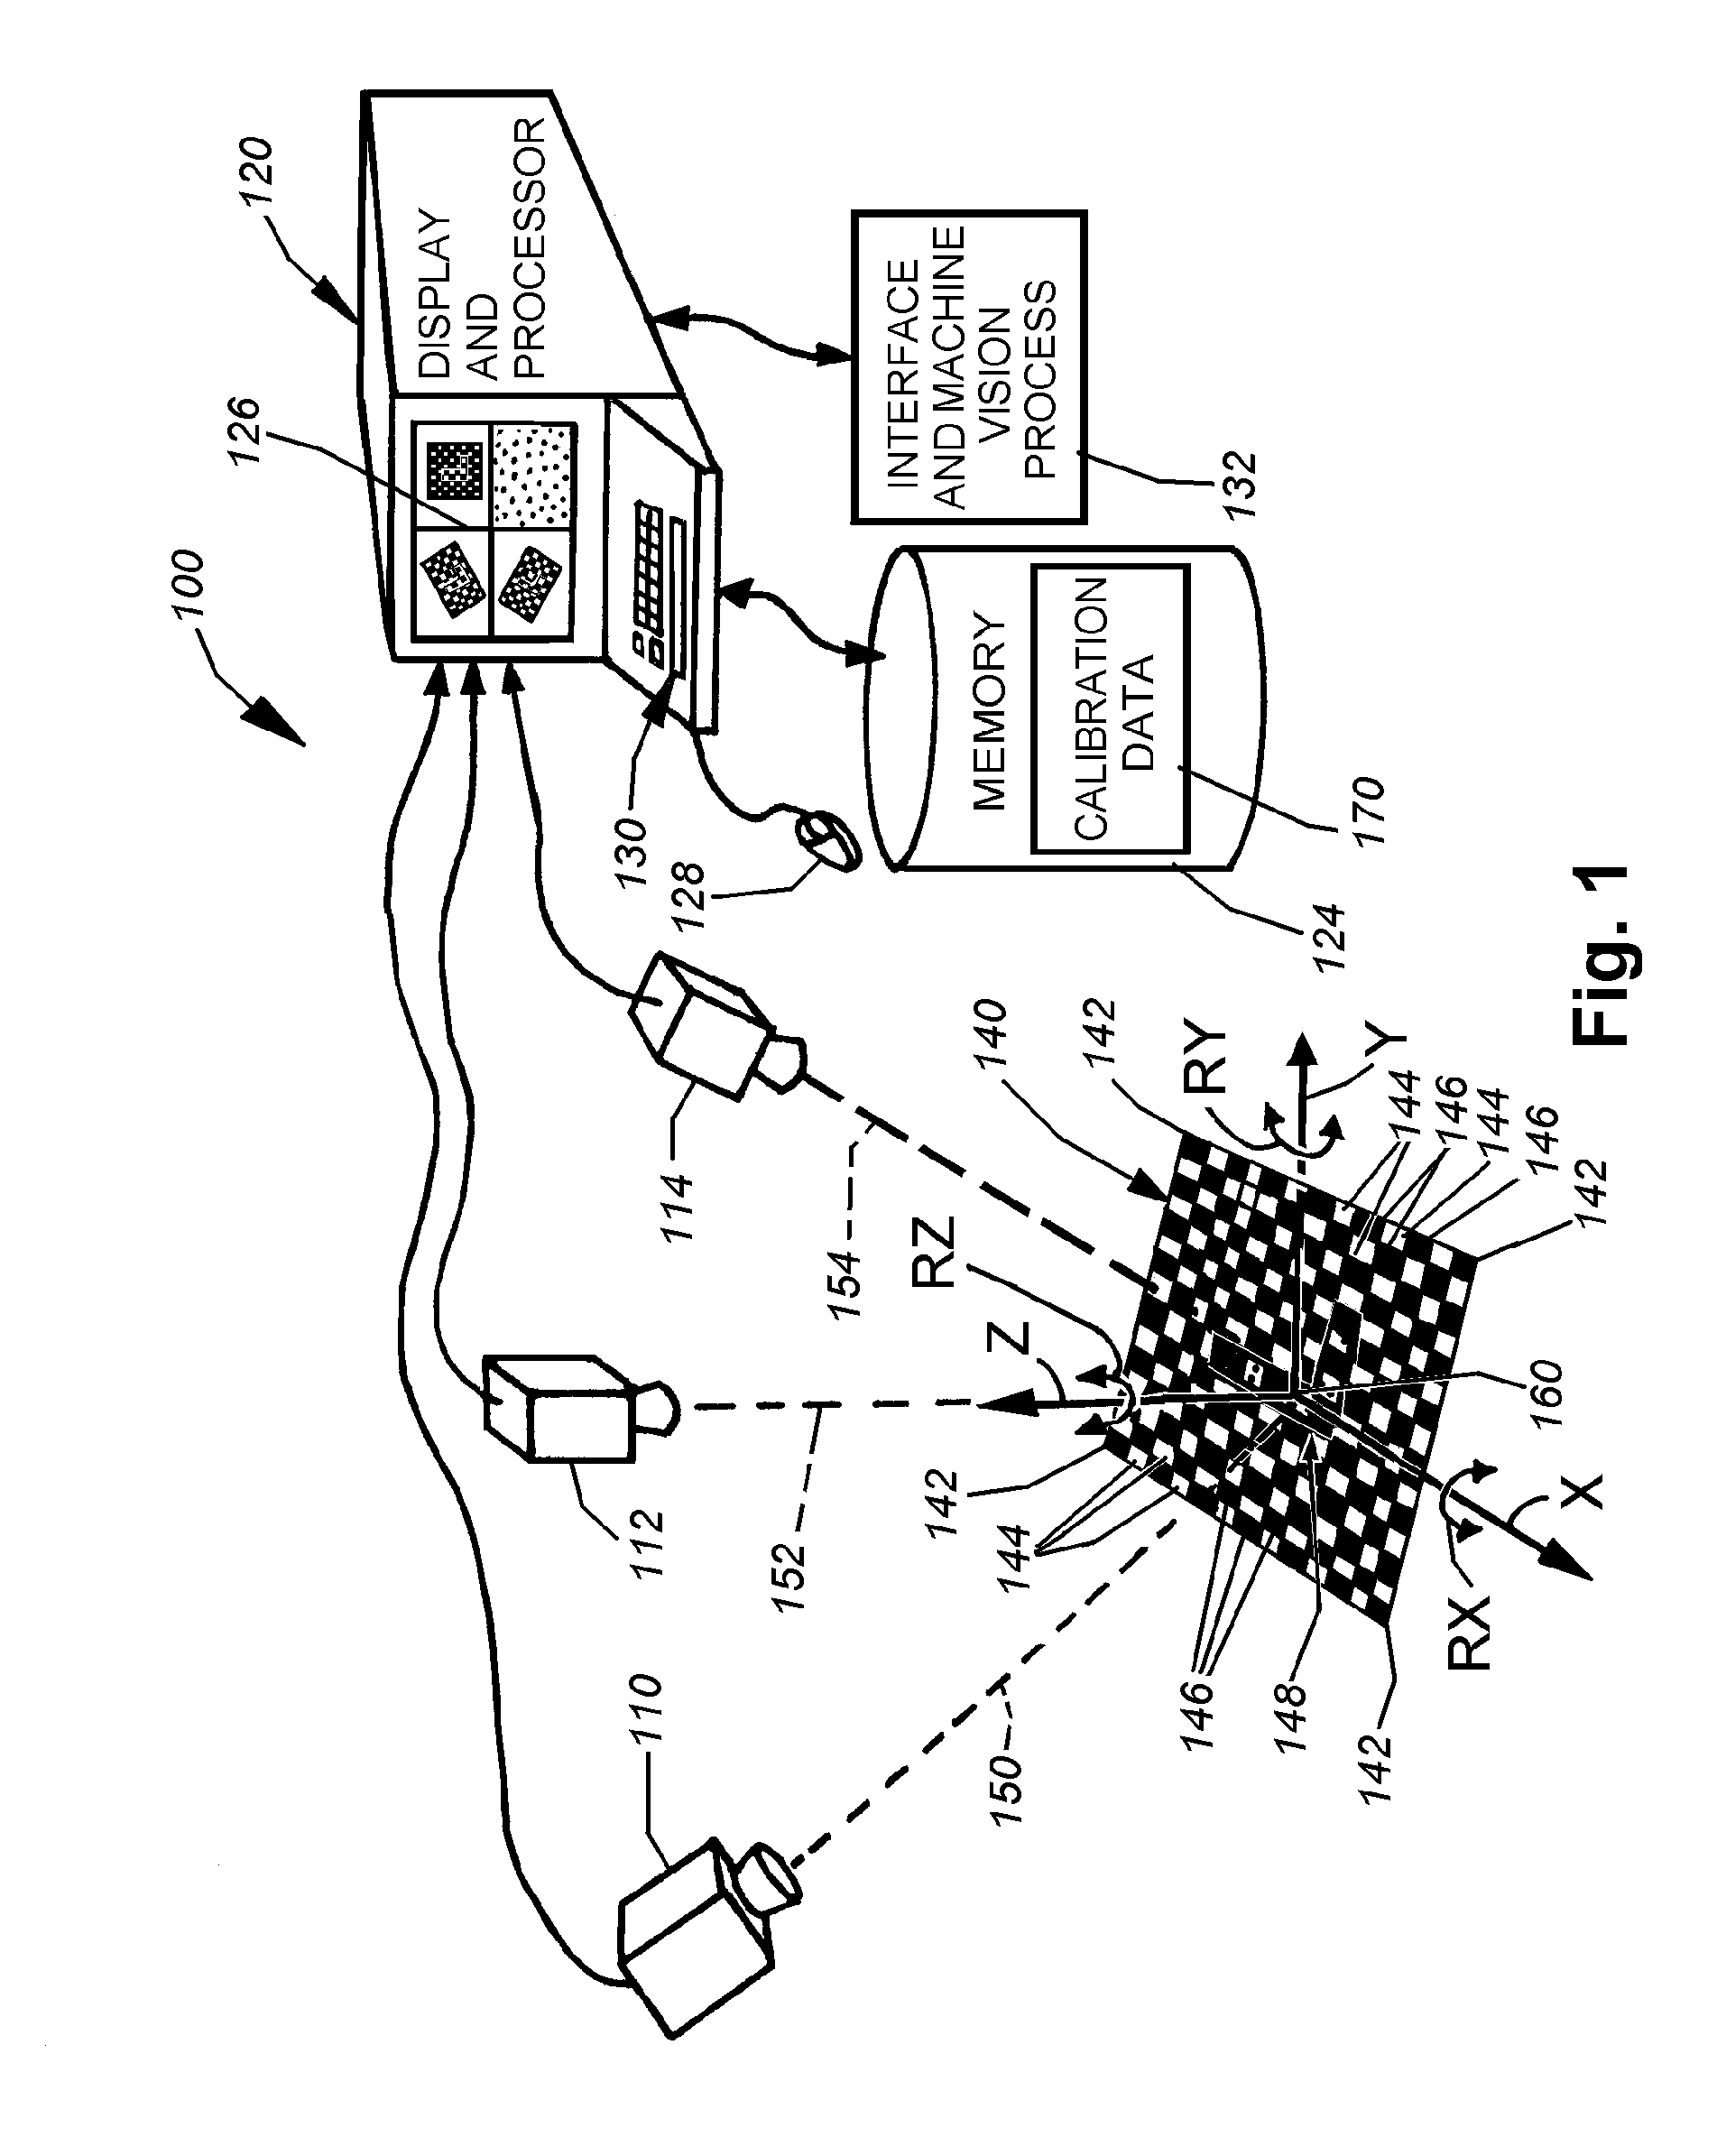 System and method for locating a three-dimensional object using machine vision